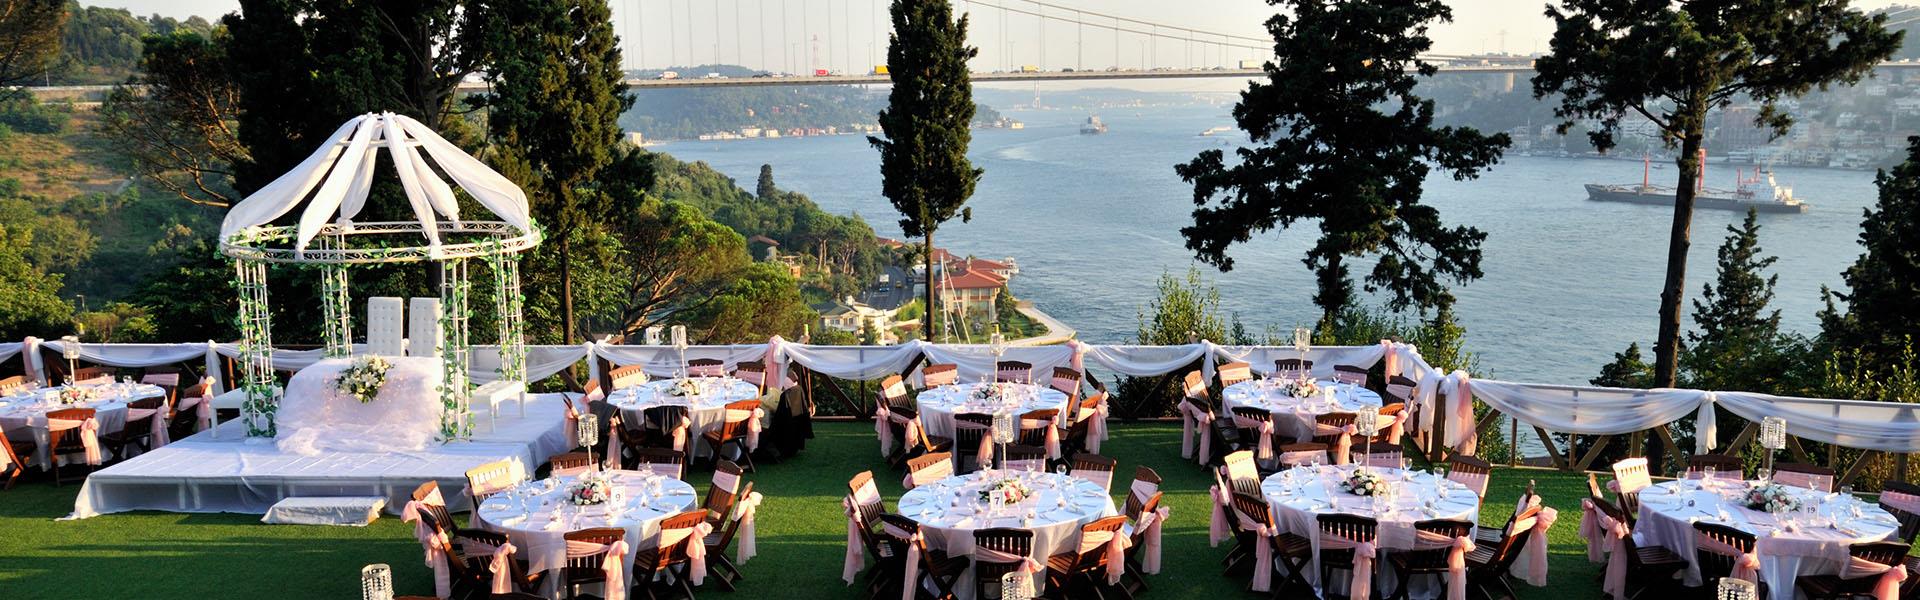 How much does a turkish wedding cost?